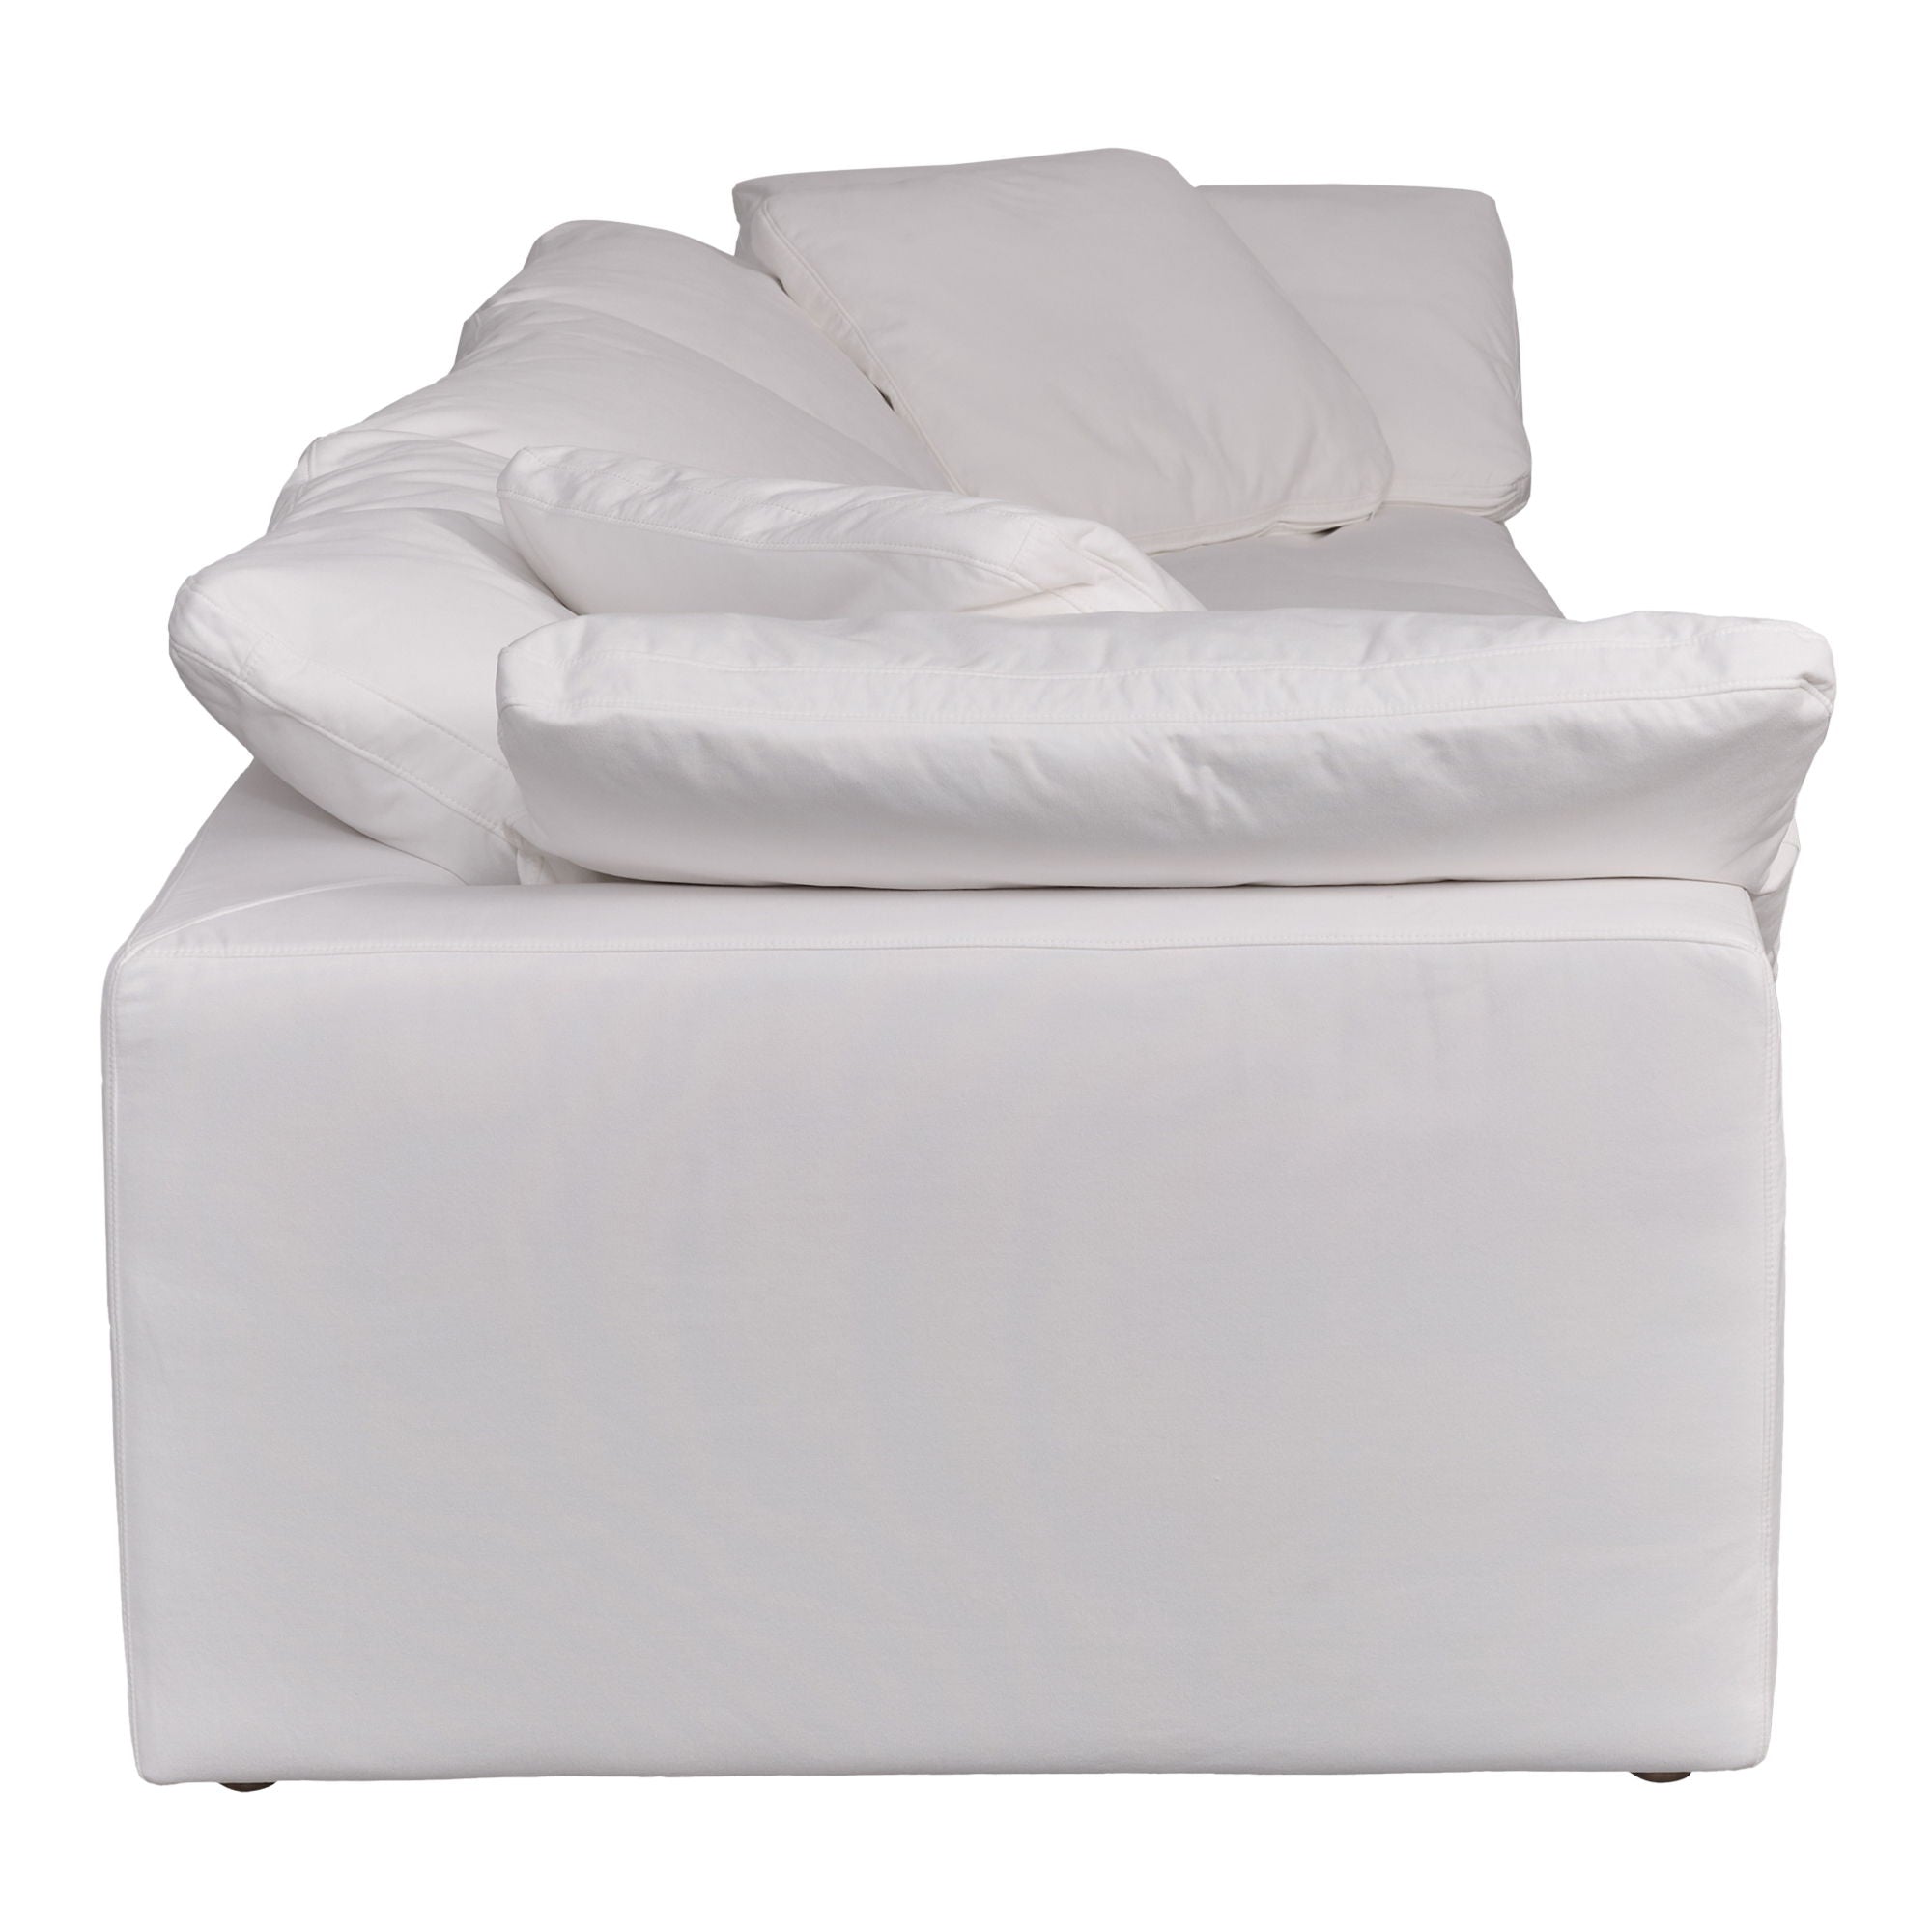 Clay - Modular Sofa Performance Fabric - White-Stationary Sectionals-American Furniture Outlet